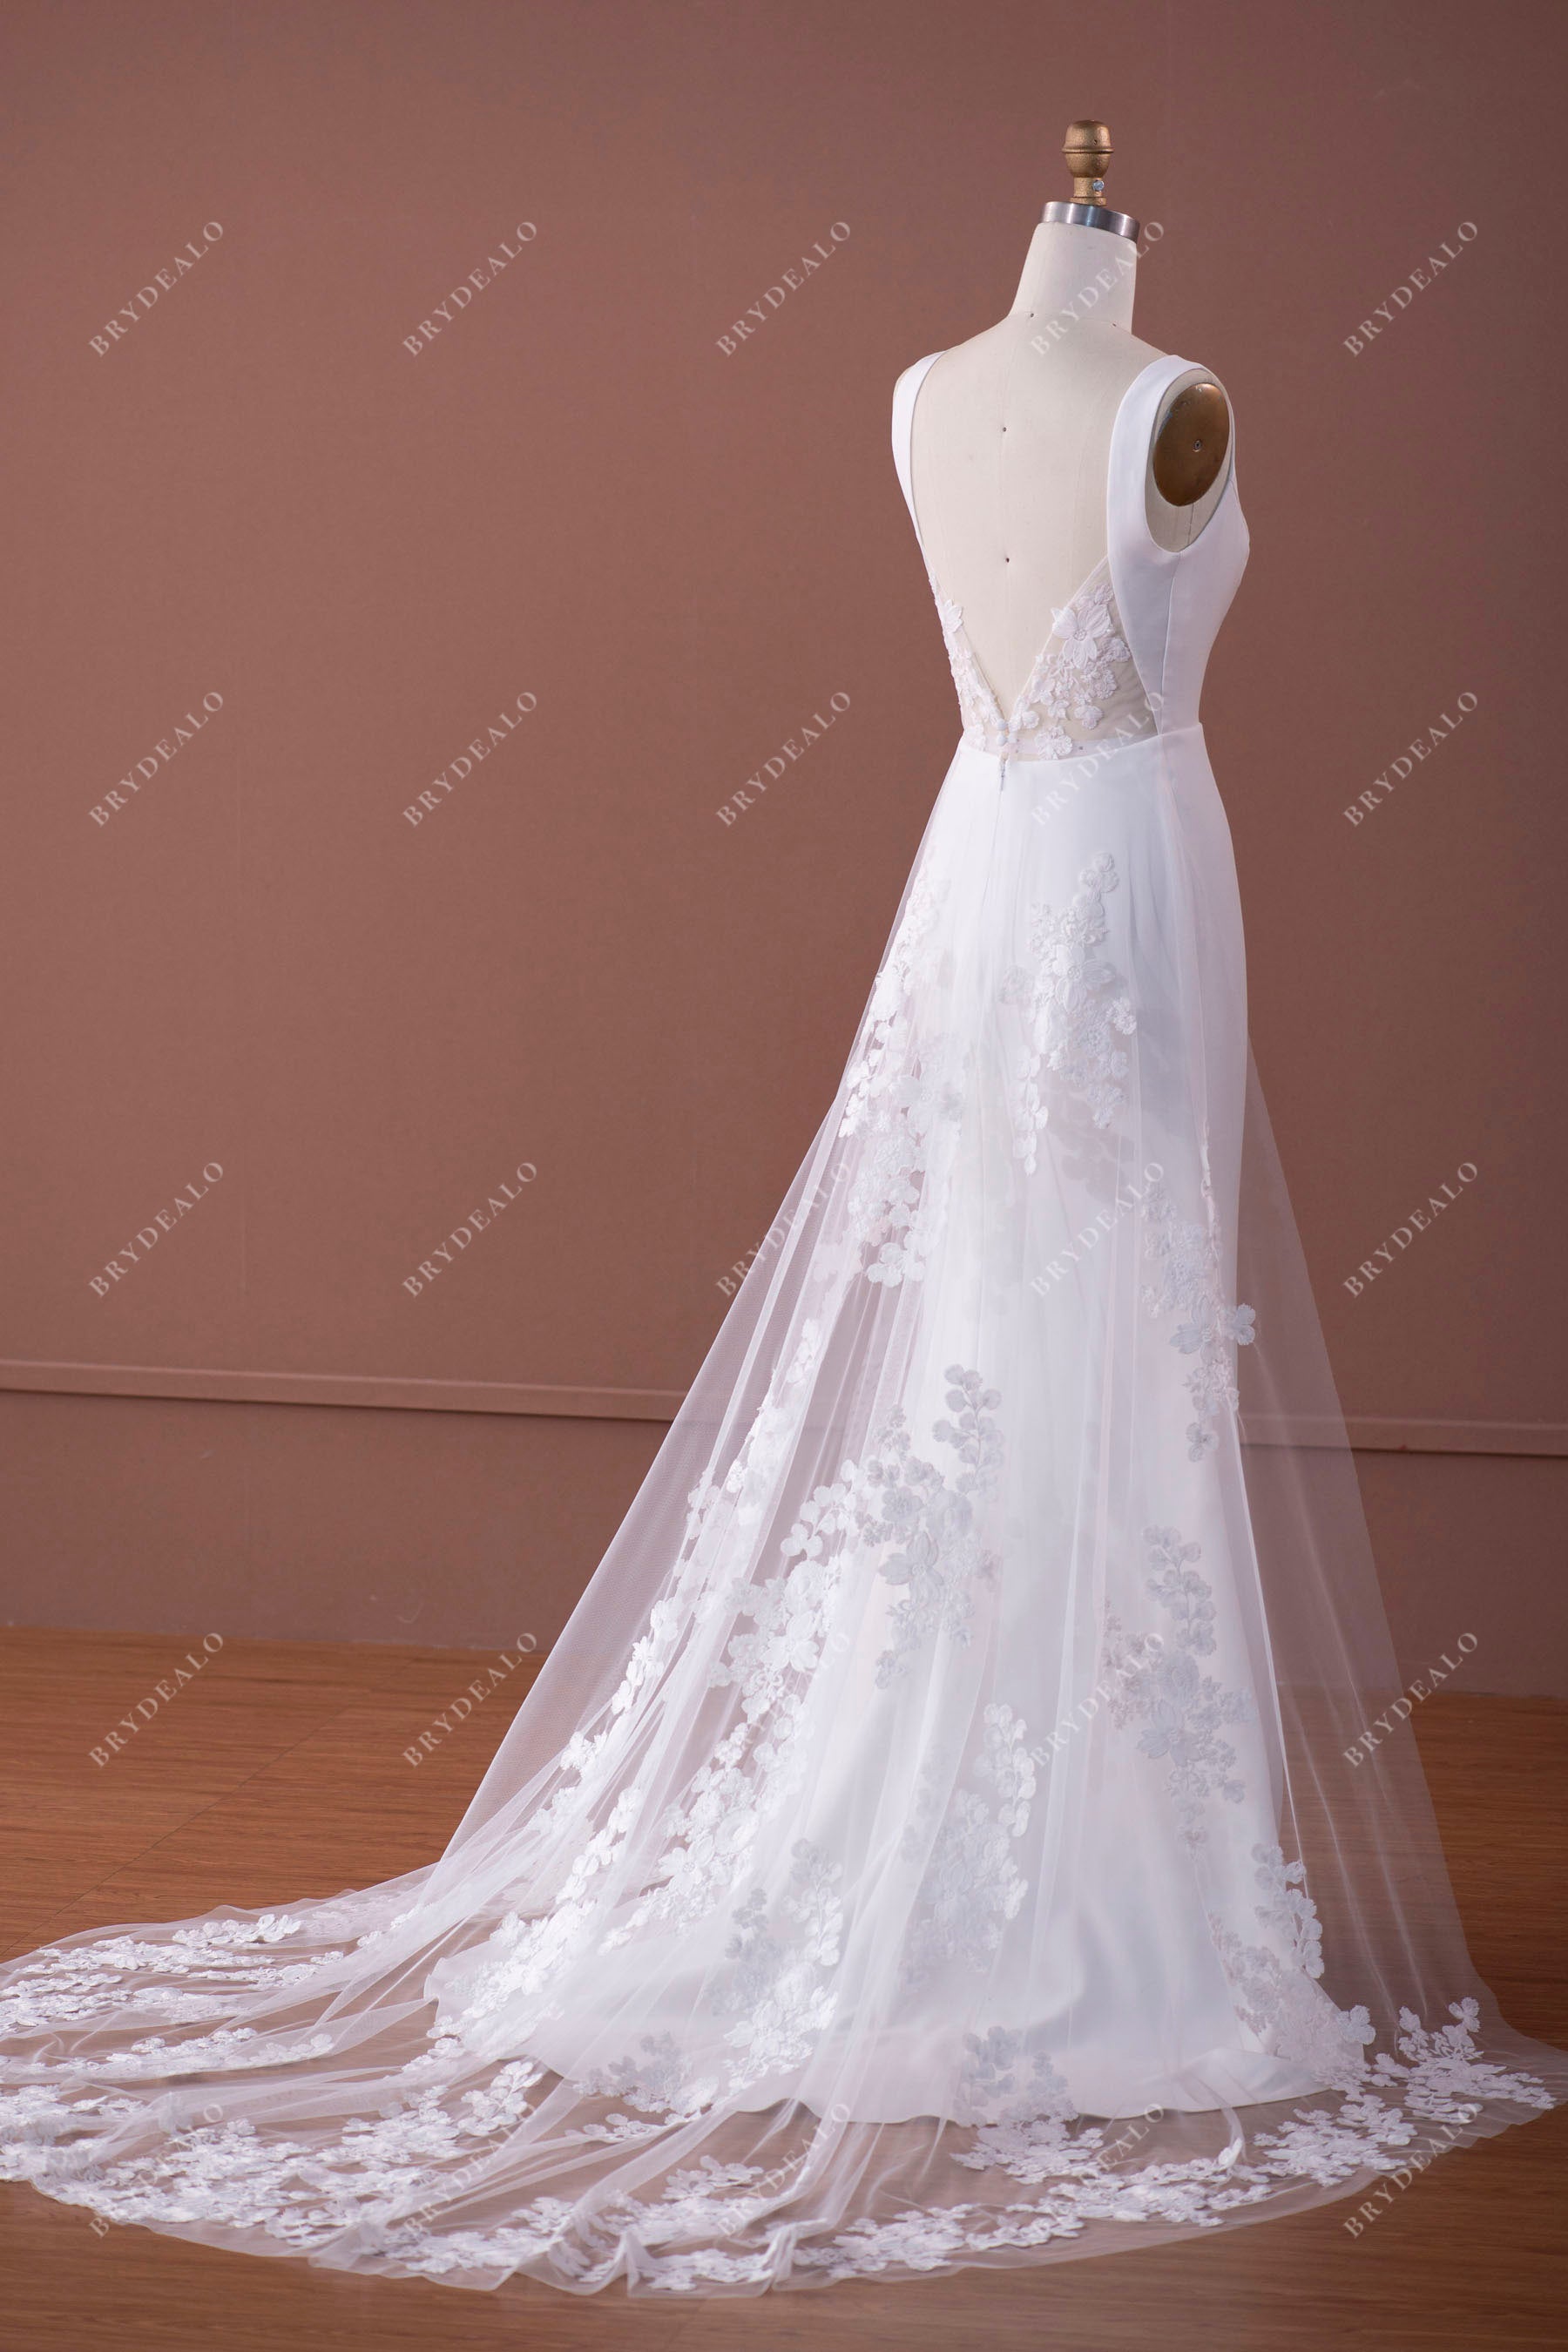 wholesale crepe mermaid wedding gown with lace panel train